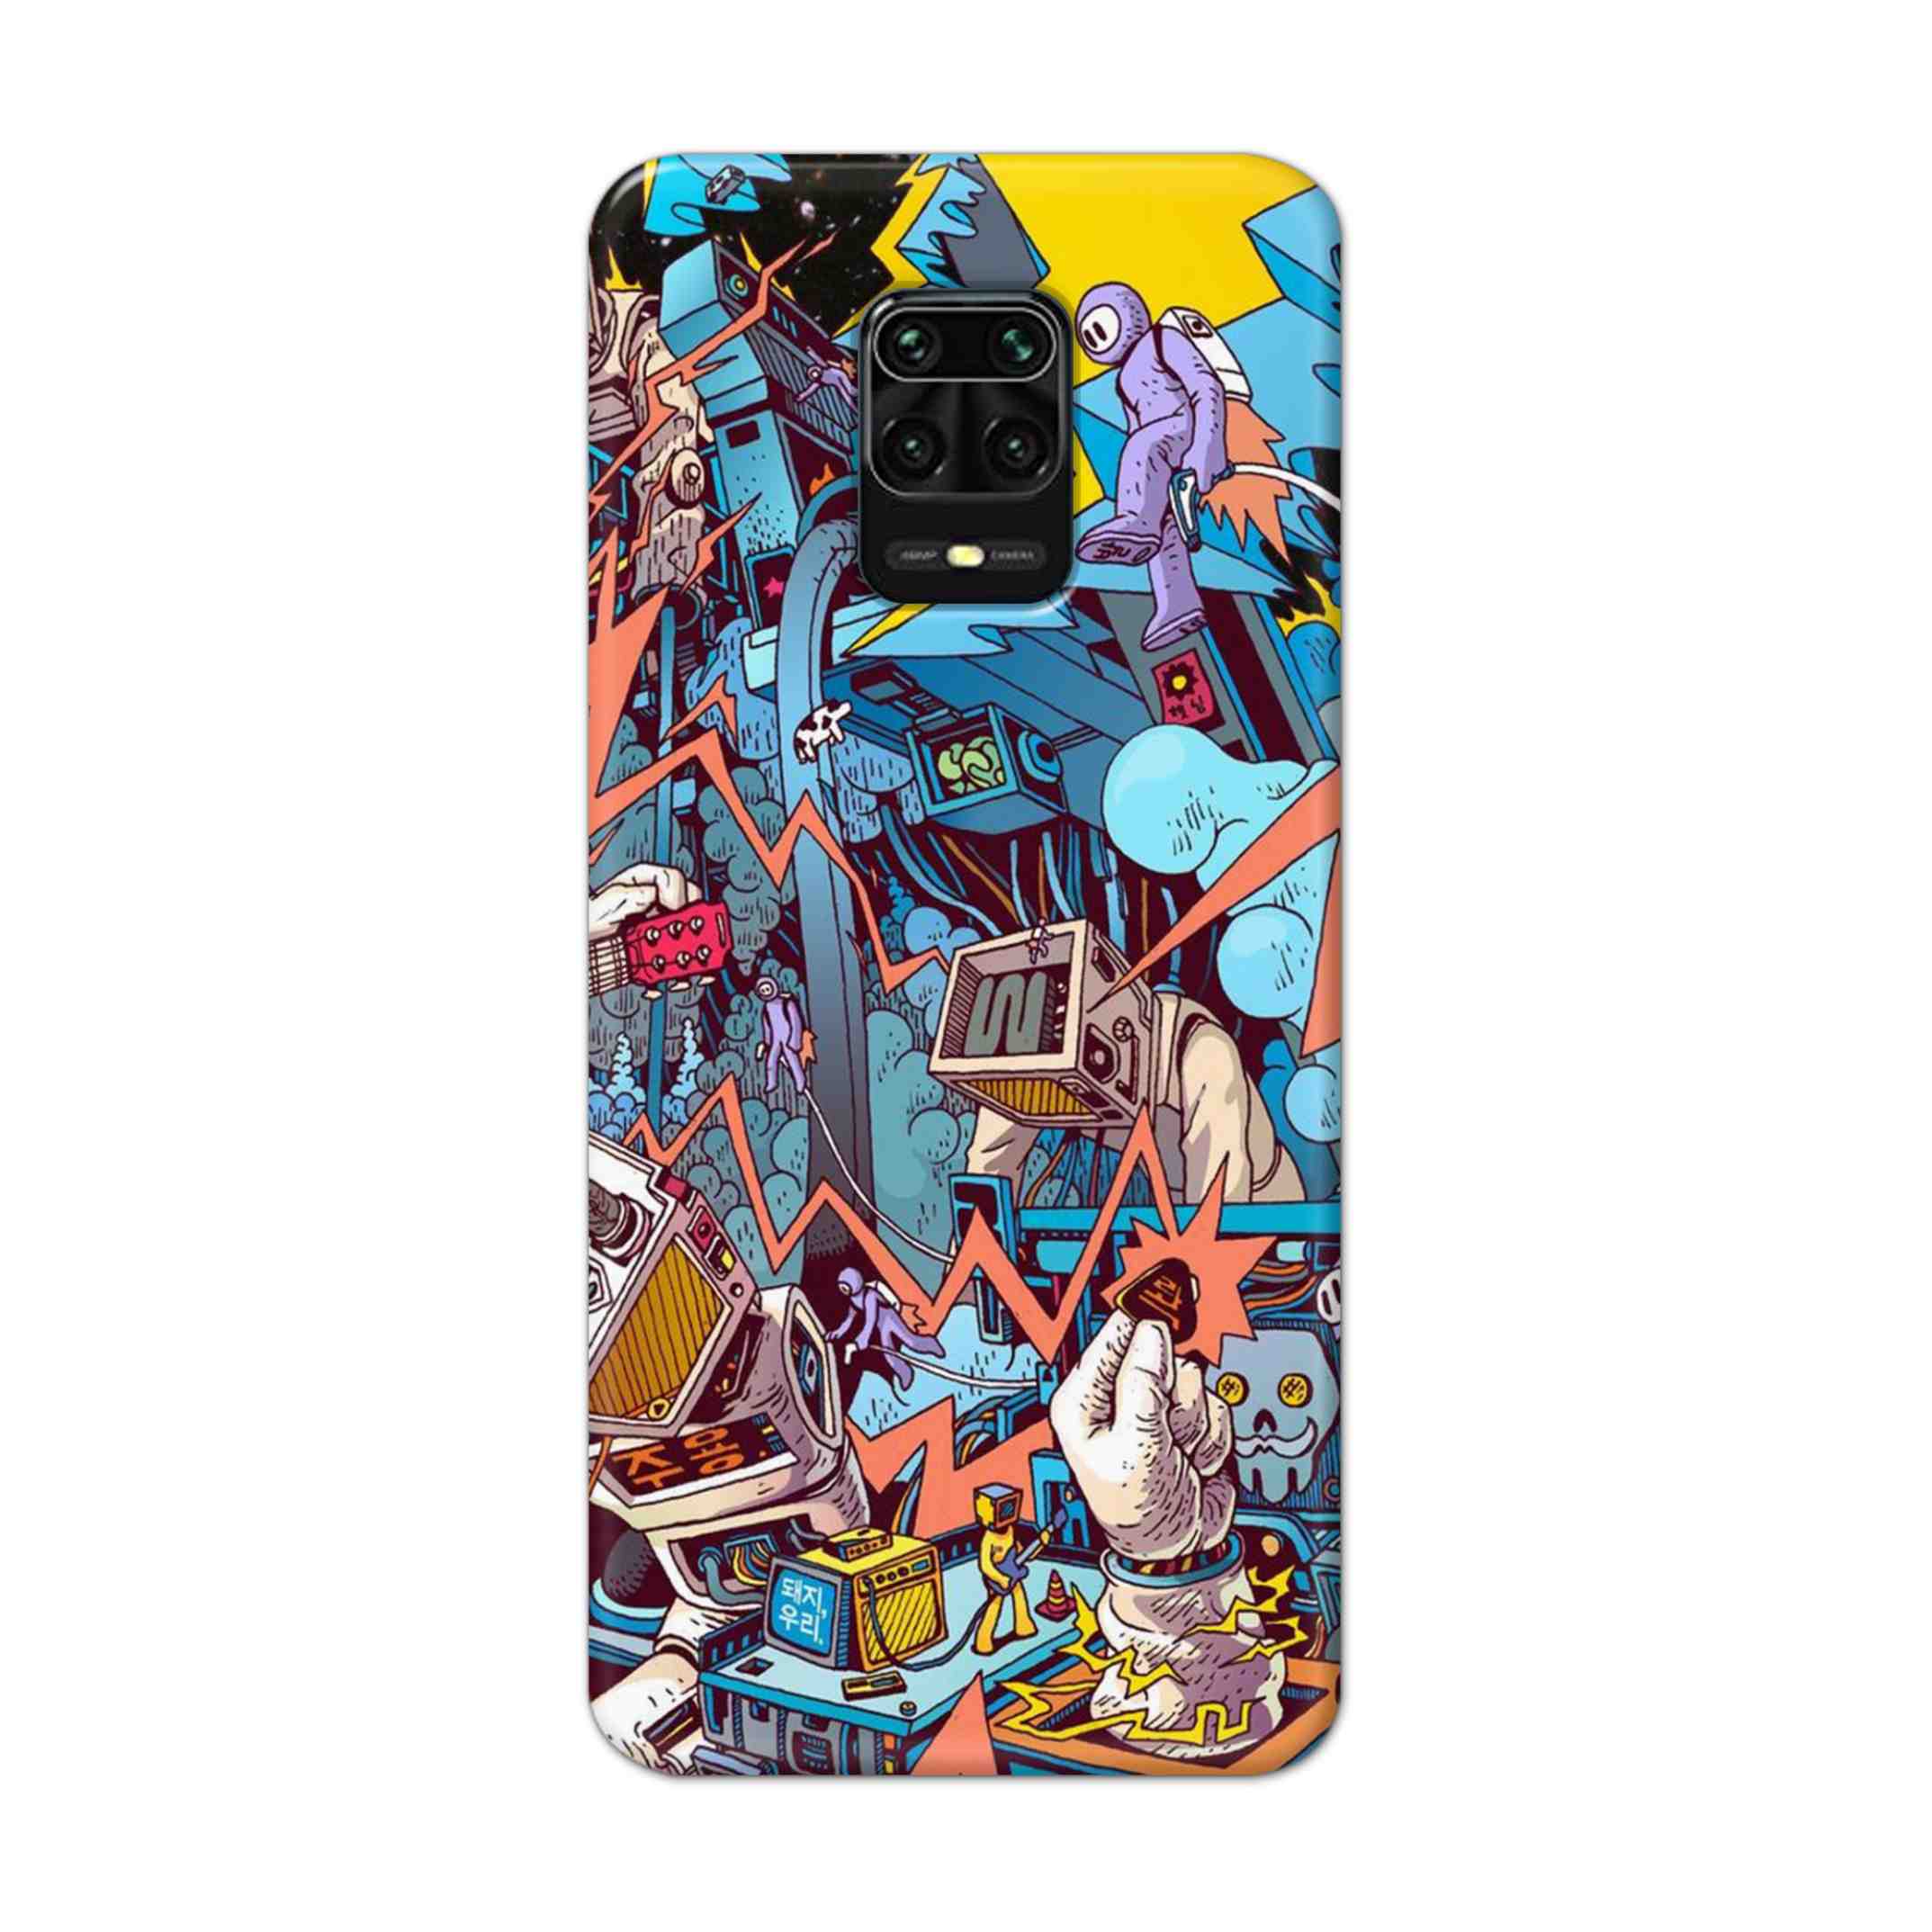 Buy Ofo Panic Hard Back Mobile Phone Case Cover For Redmi Note 9 Pro Online